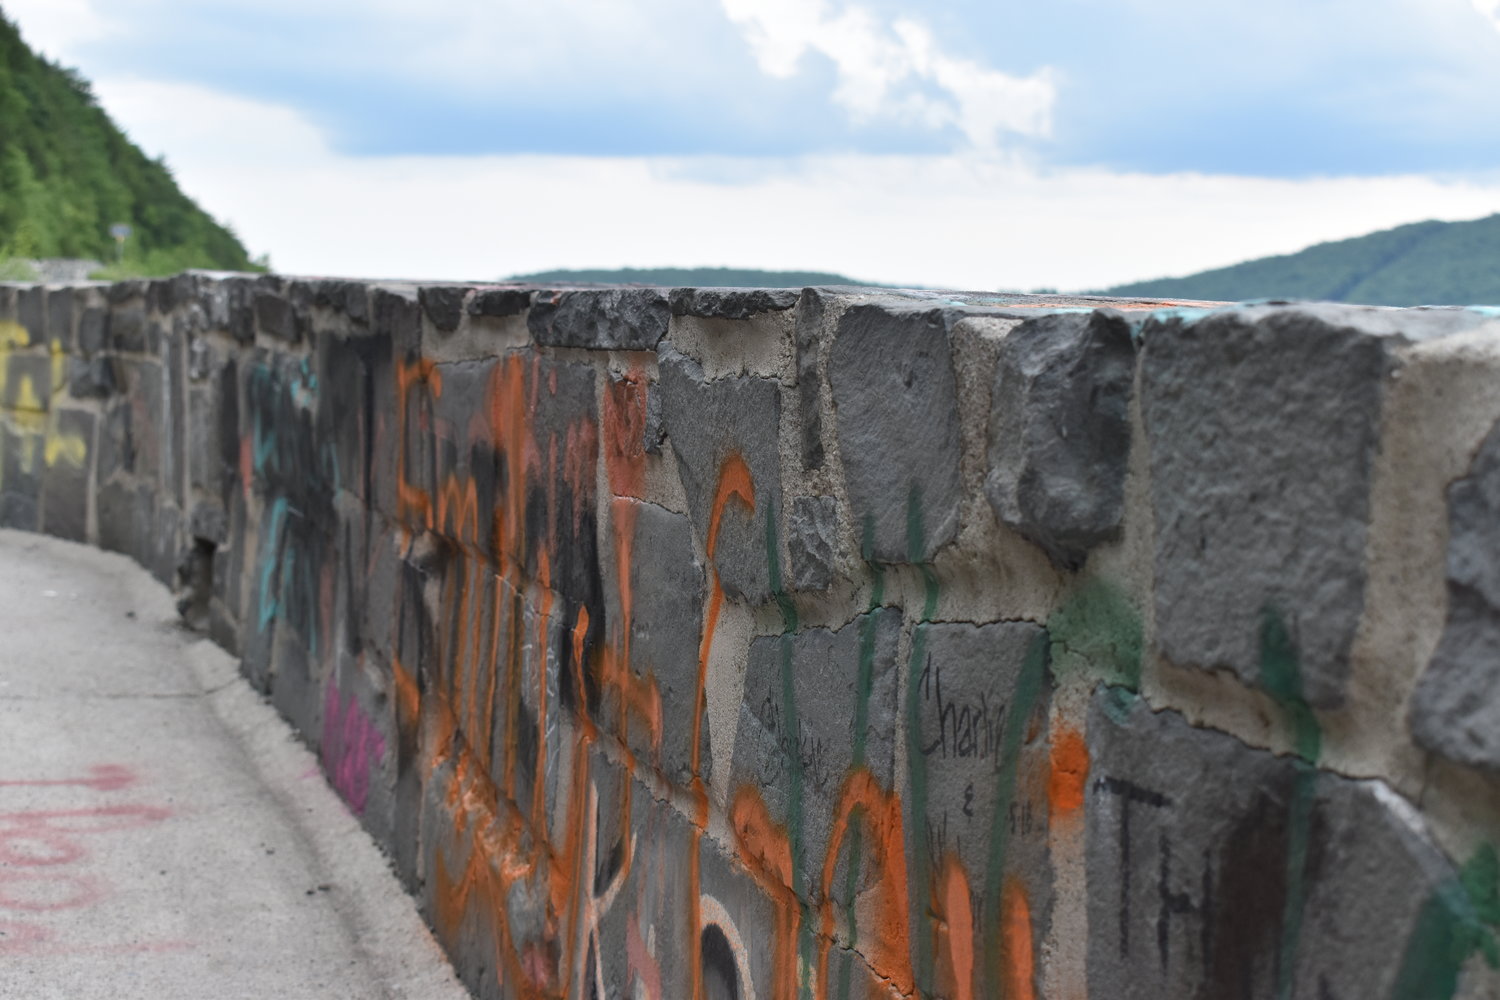 The Hawks Nest, a once beautiful scenic overlook, has been overtaken by graffiti.